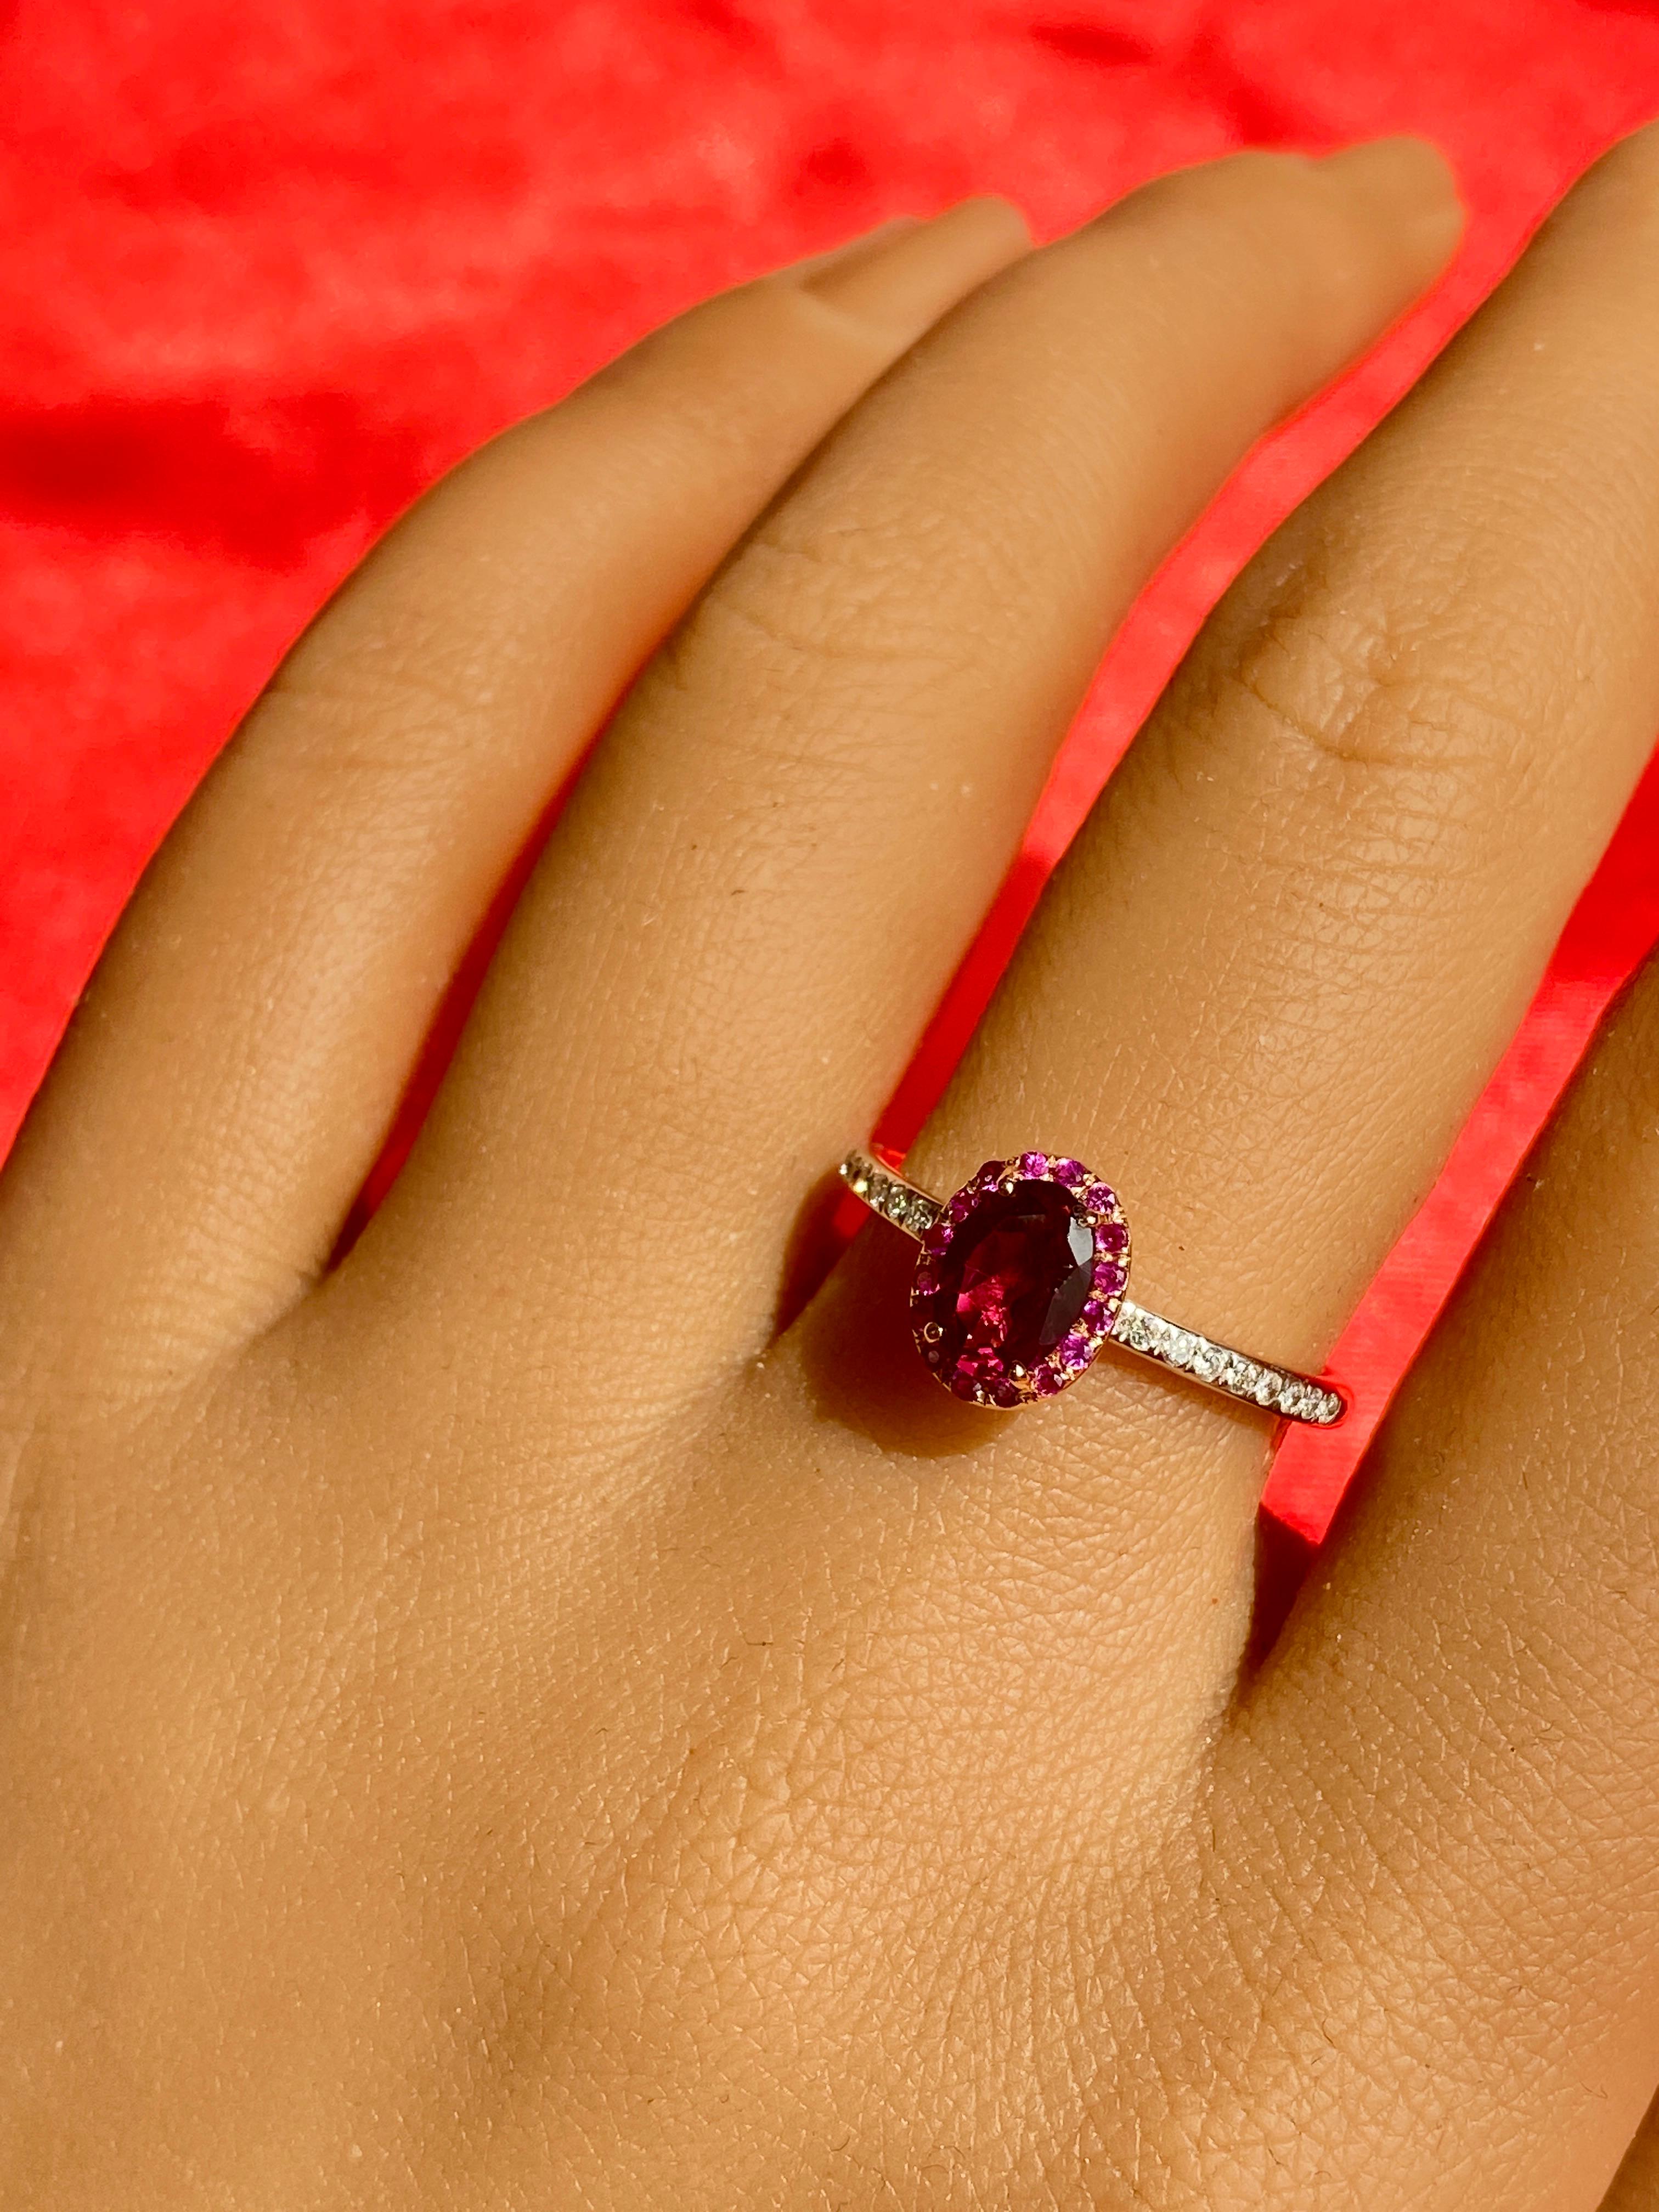 Our Purple Garnet Ring! The center stone is a beautiful rhodolite garnet! The halo consists of marvelous red rubies, and the shank has round white diamonds! It is a unique ring with warm colors that work together in such a unique way! 

14K Rose